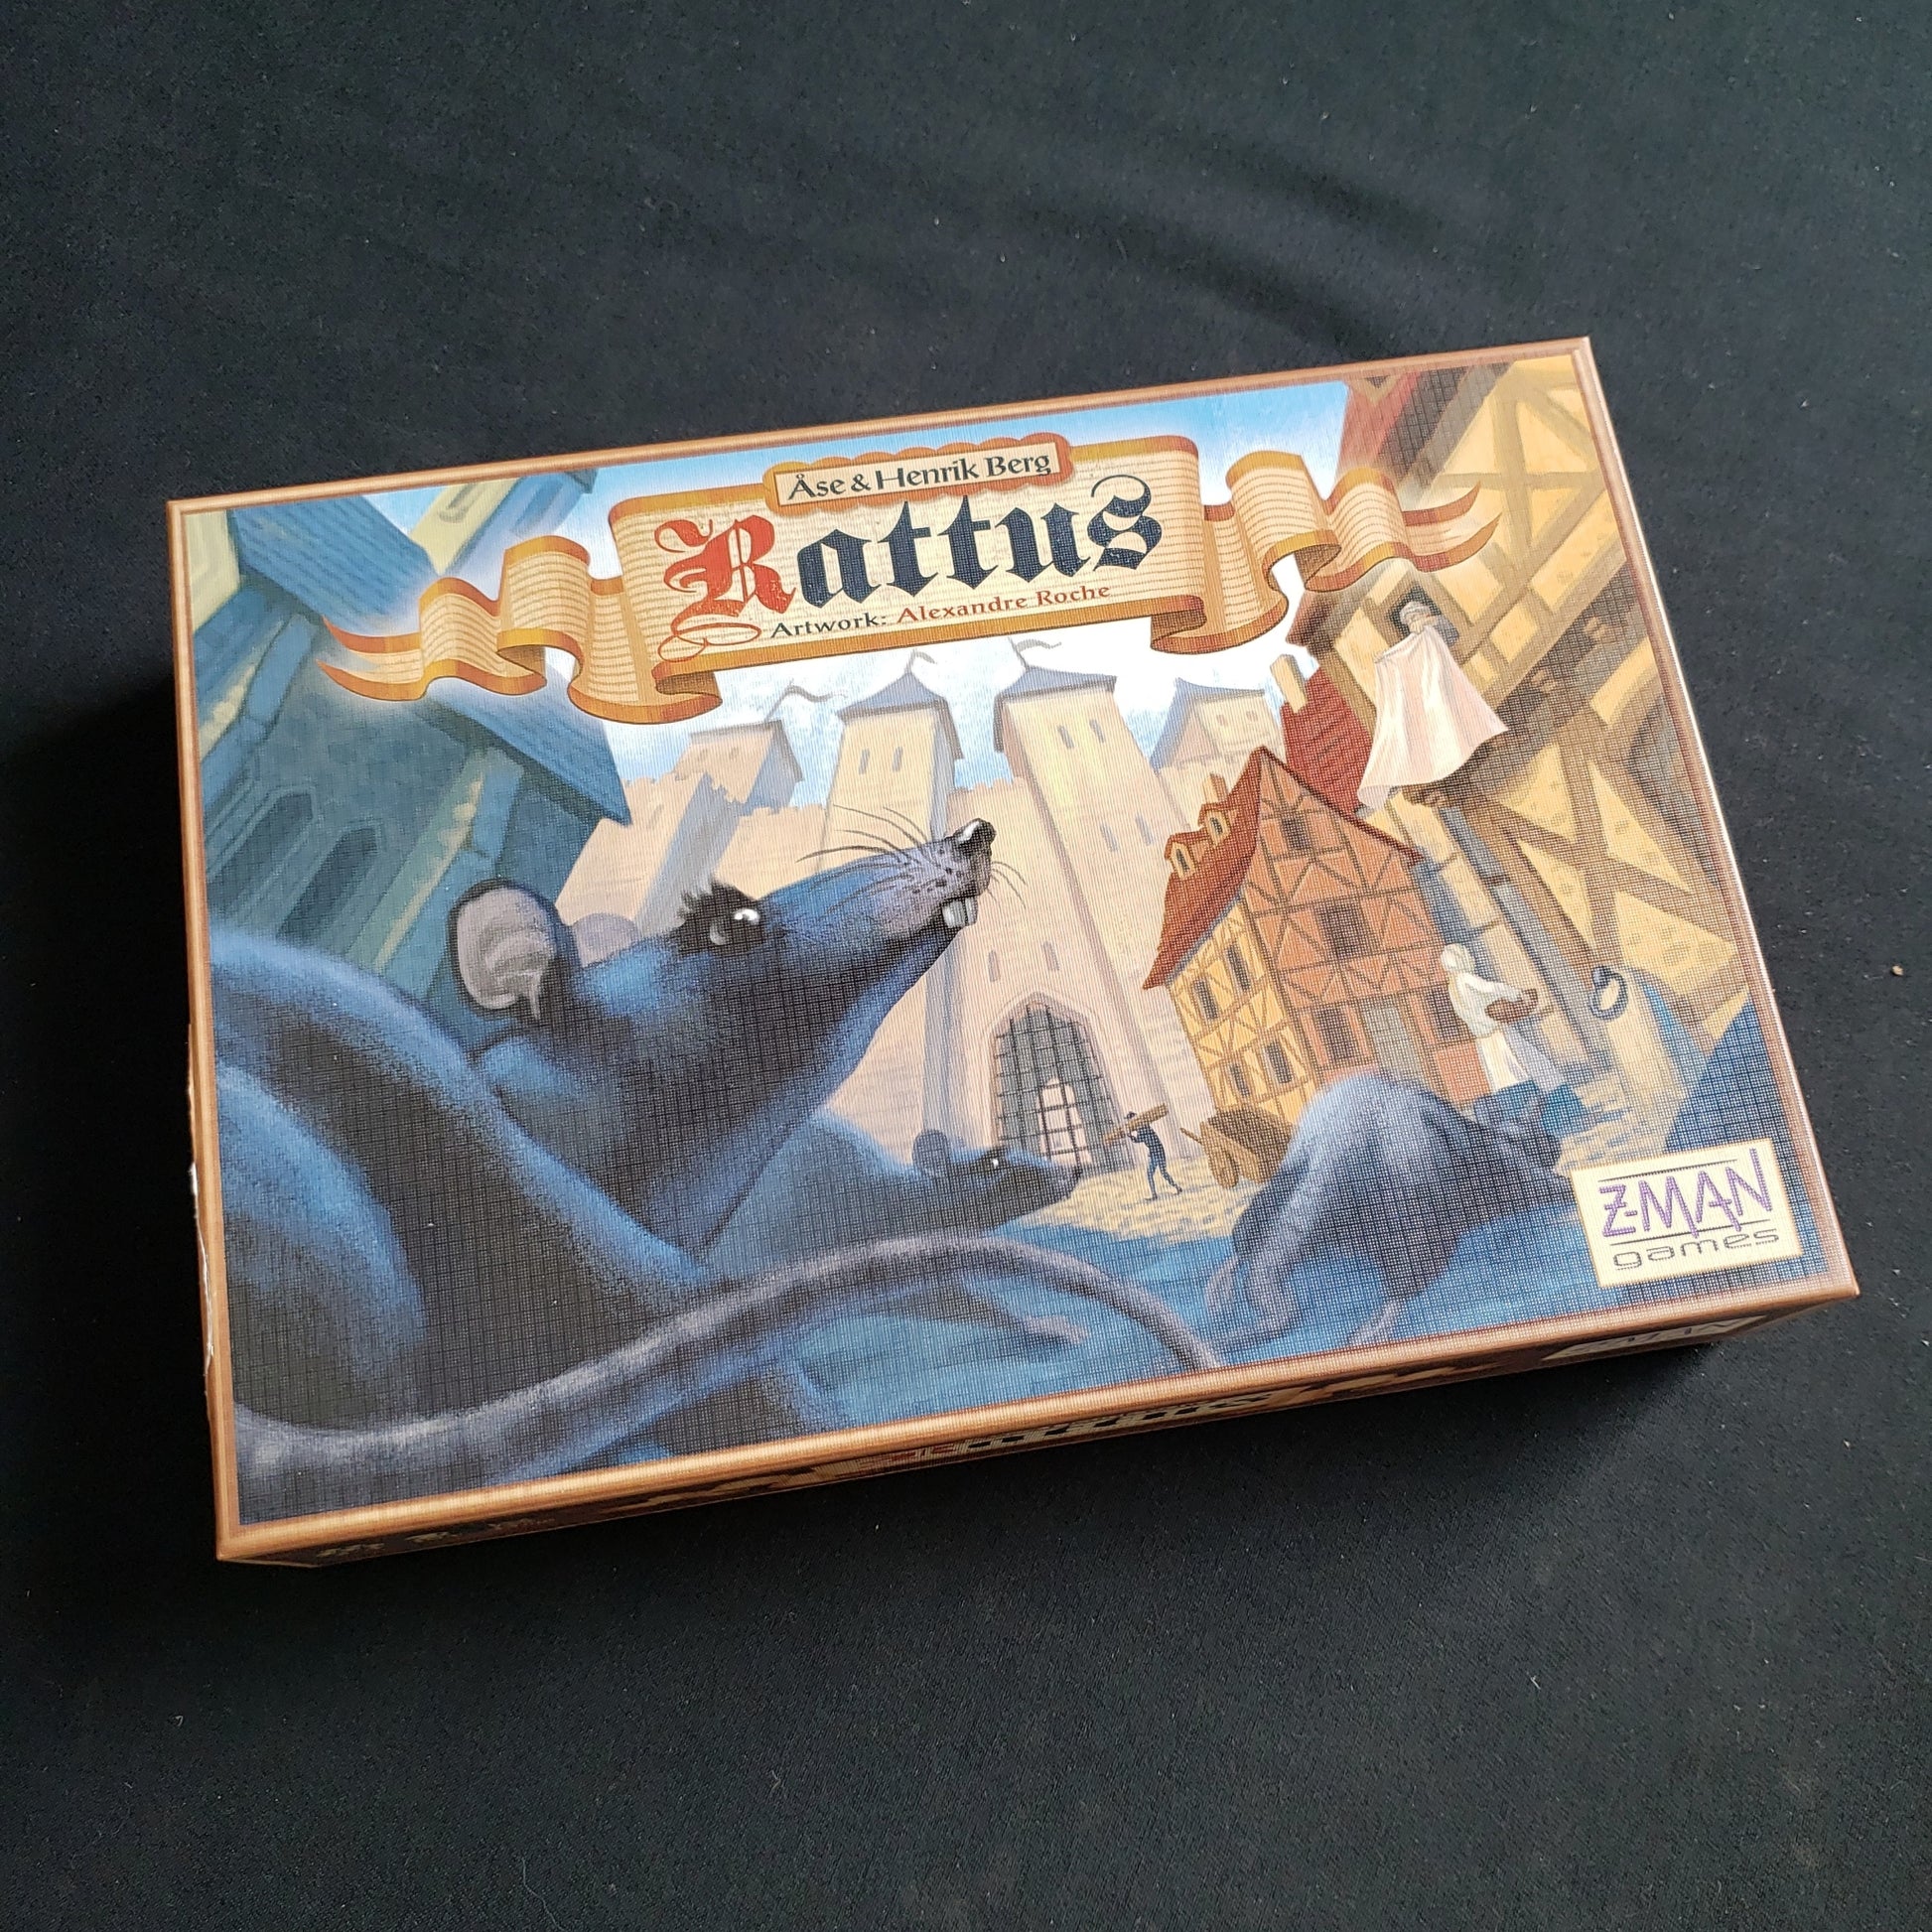 Image shows the front cover of the box of the Rattus board game